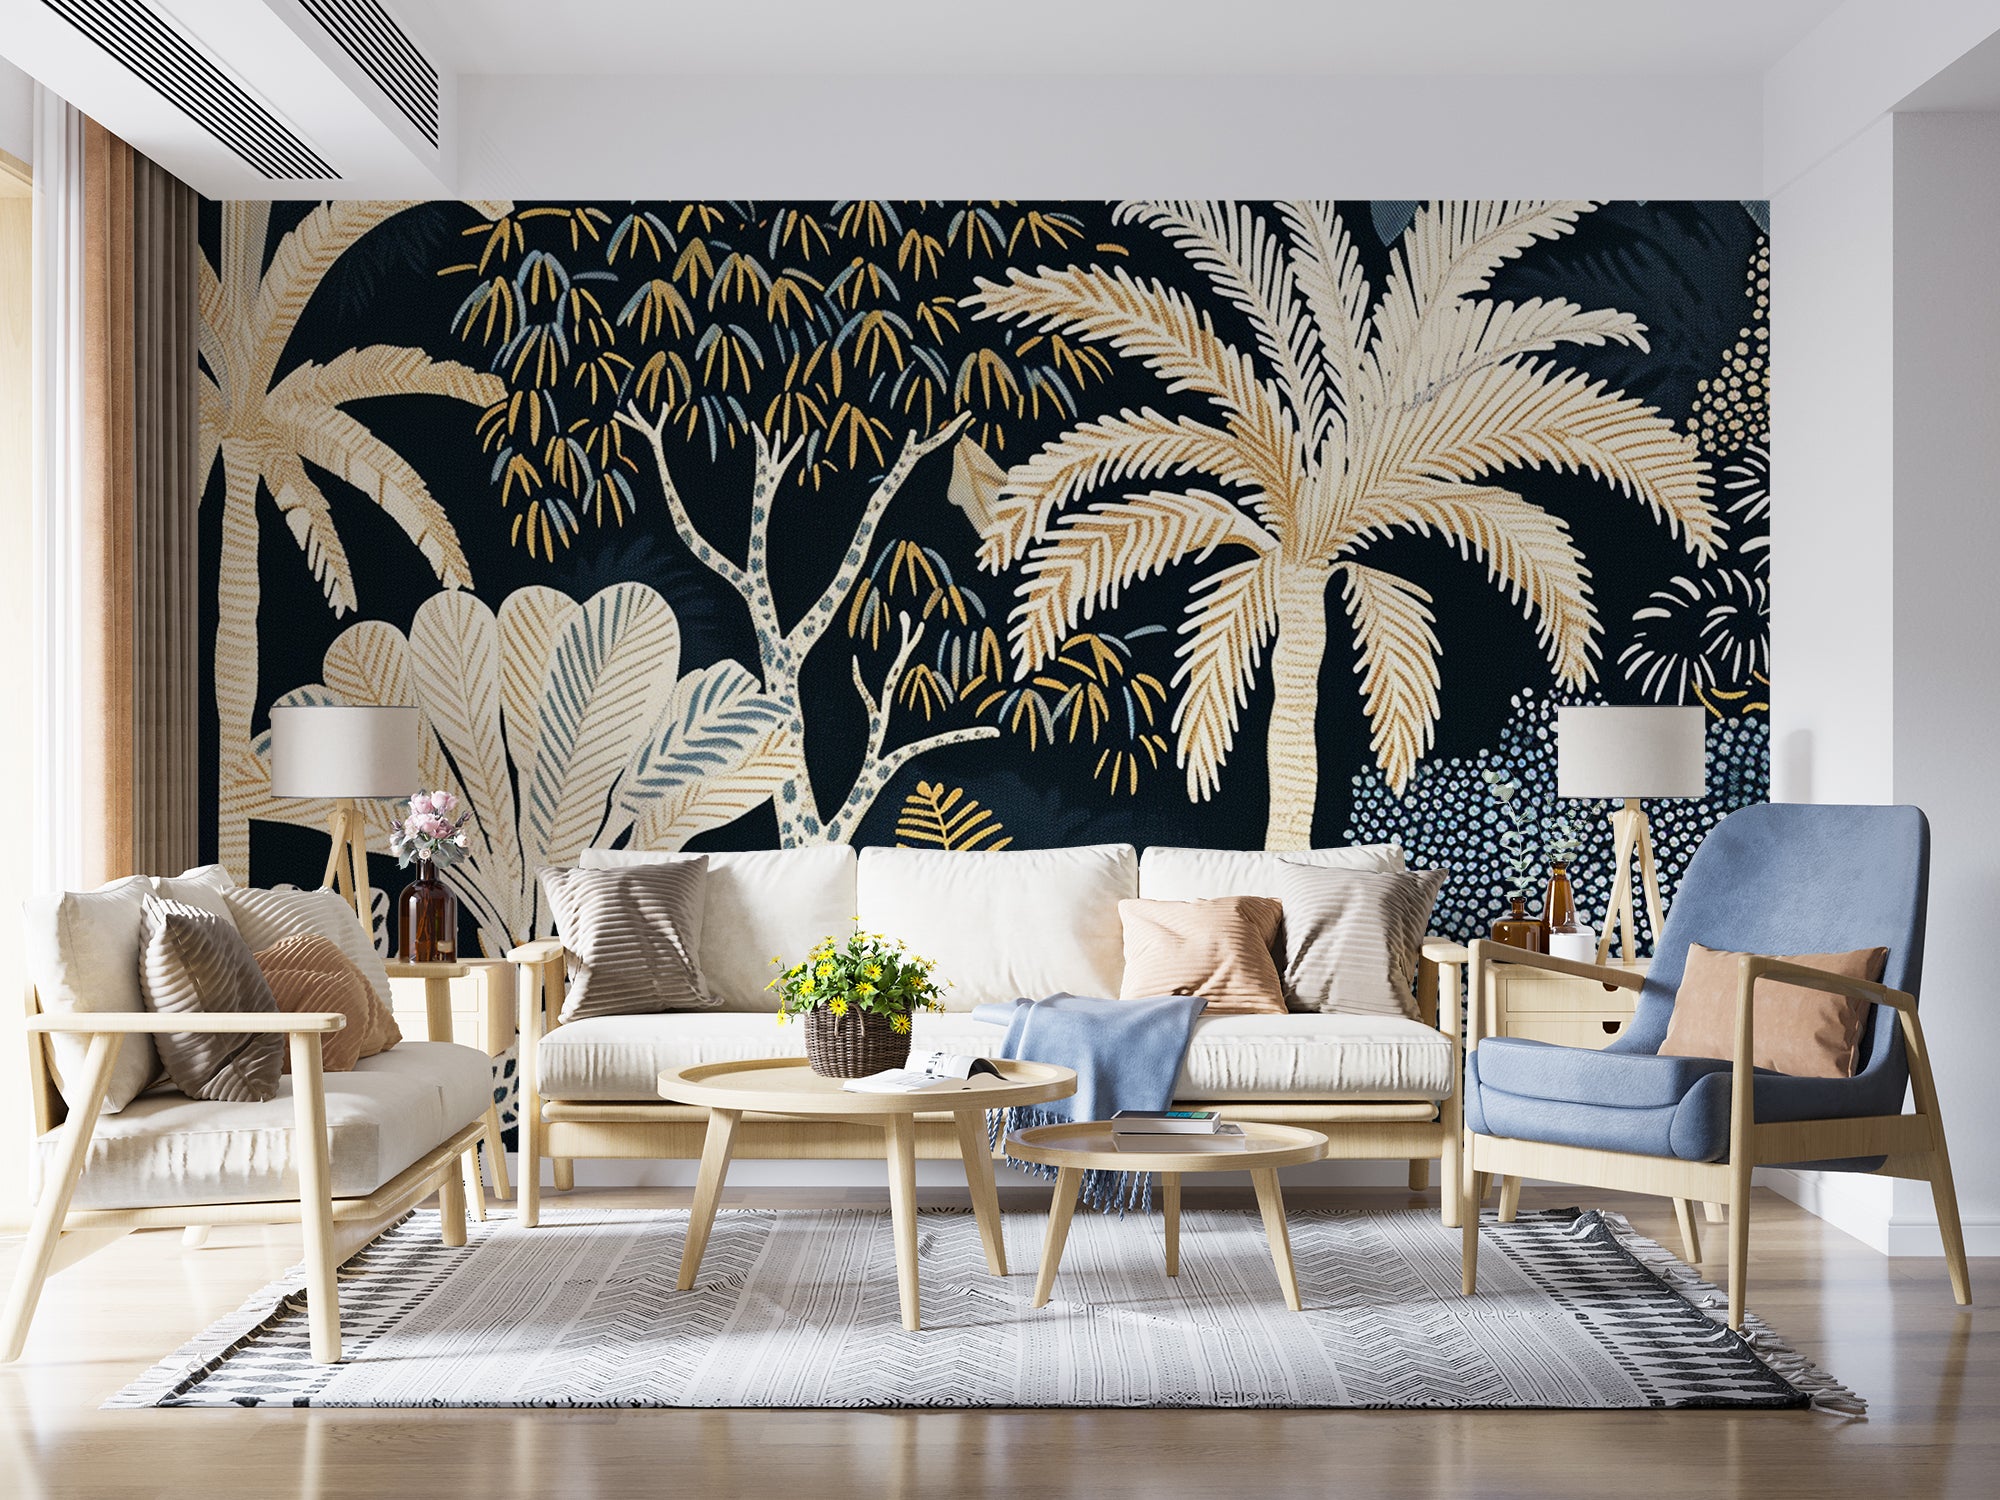 Tropical Radiance – Wall Luxuriance in Large Format